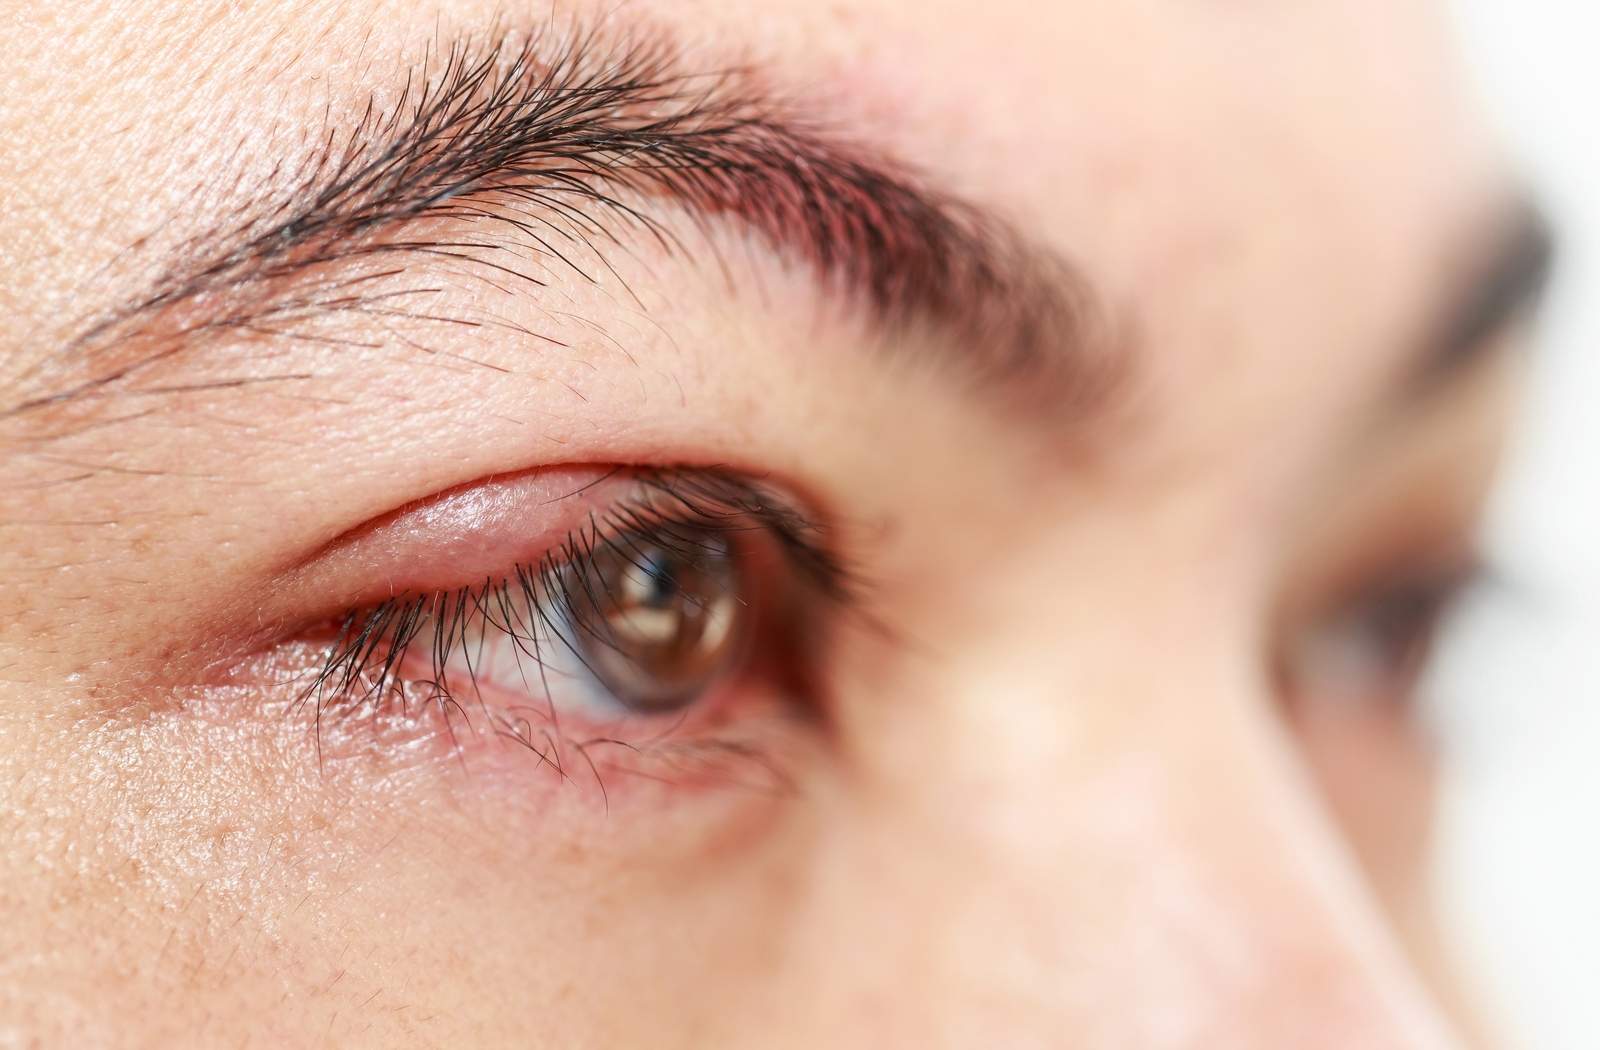 A close up of a woman's right eye with a swollen upper eyelid as she her meibomian glands are clogged